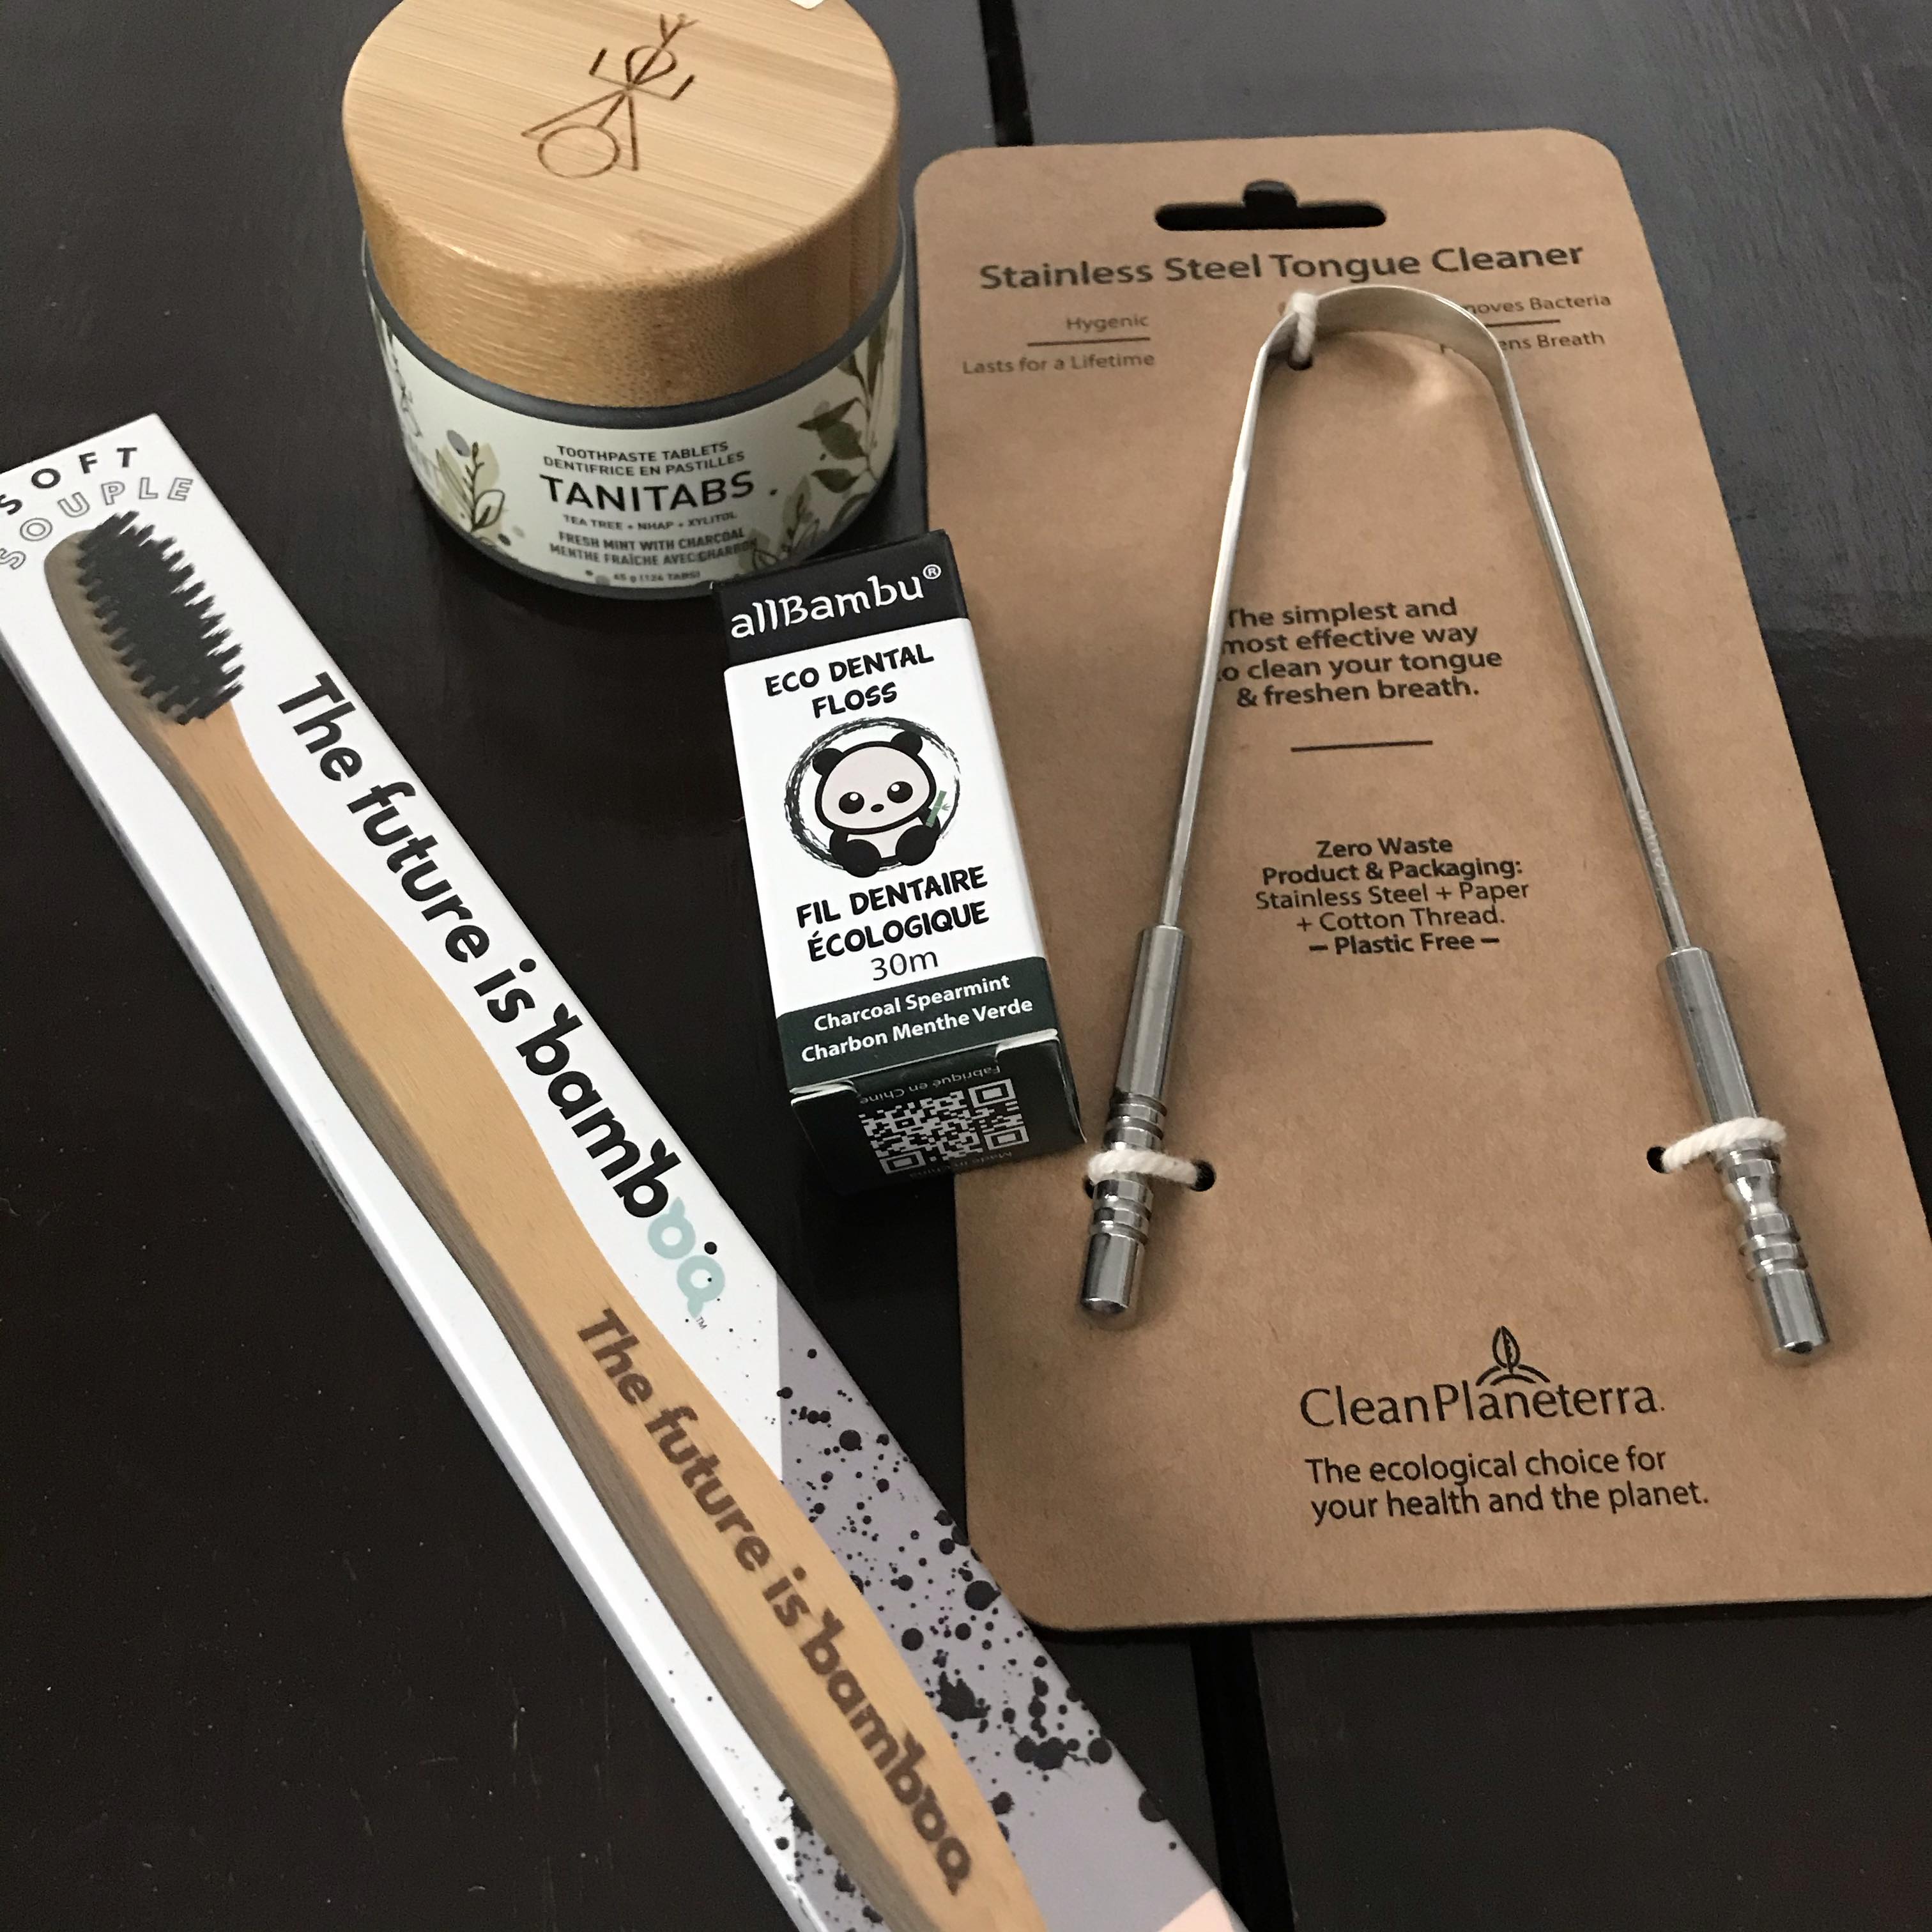 Included in this eco oral care kit is a soft charcoal bamboo toothbrush from The future is bamboo, a charcoal eco dental floss in a glass tube from allBambu, a glass jar of Tanitabs 124 fresh mint with charcoal toothpaste tablets from Tanit Botanics and a Stainless Steel Tongue Cleaner from Clean Planeterra